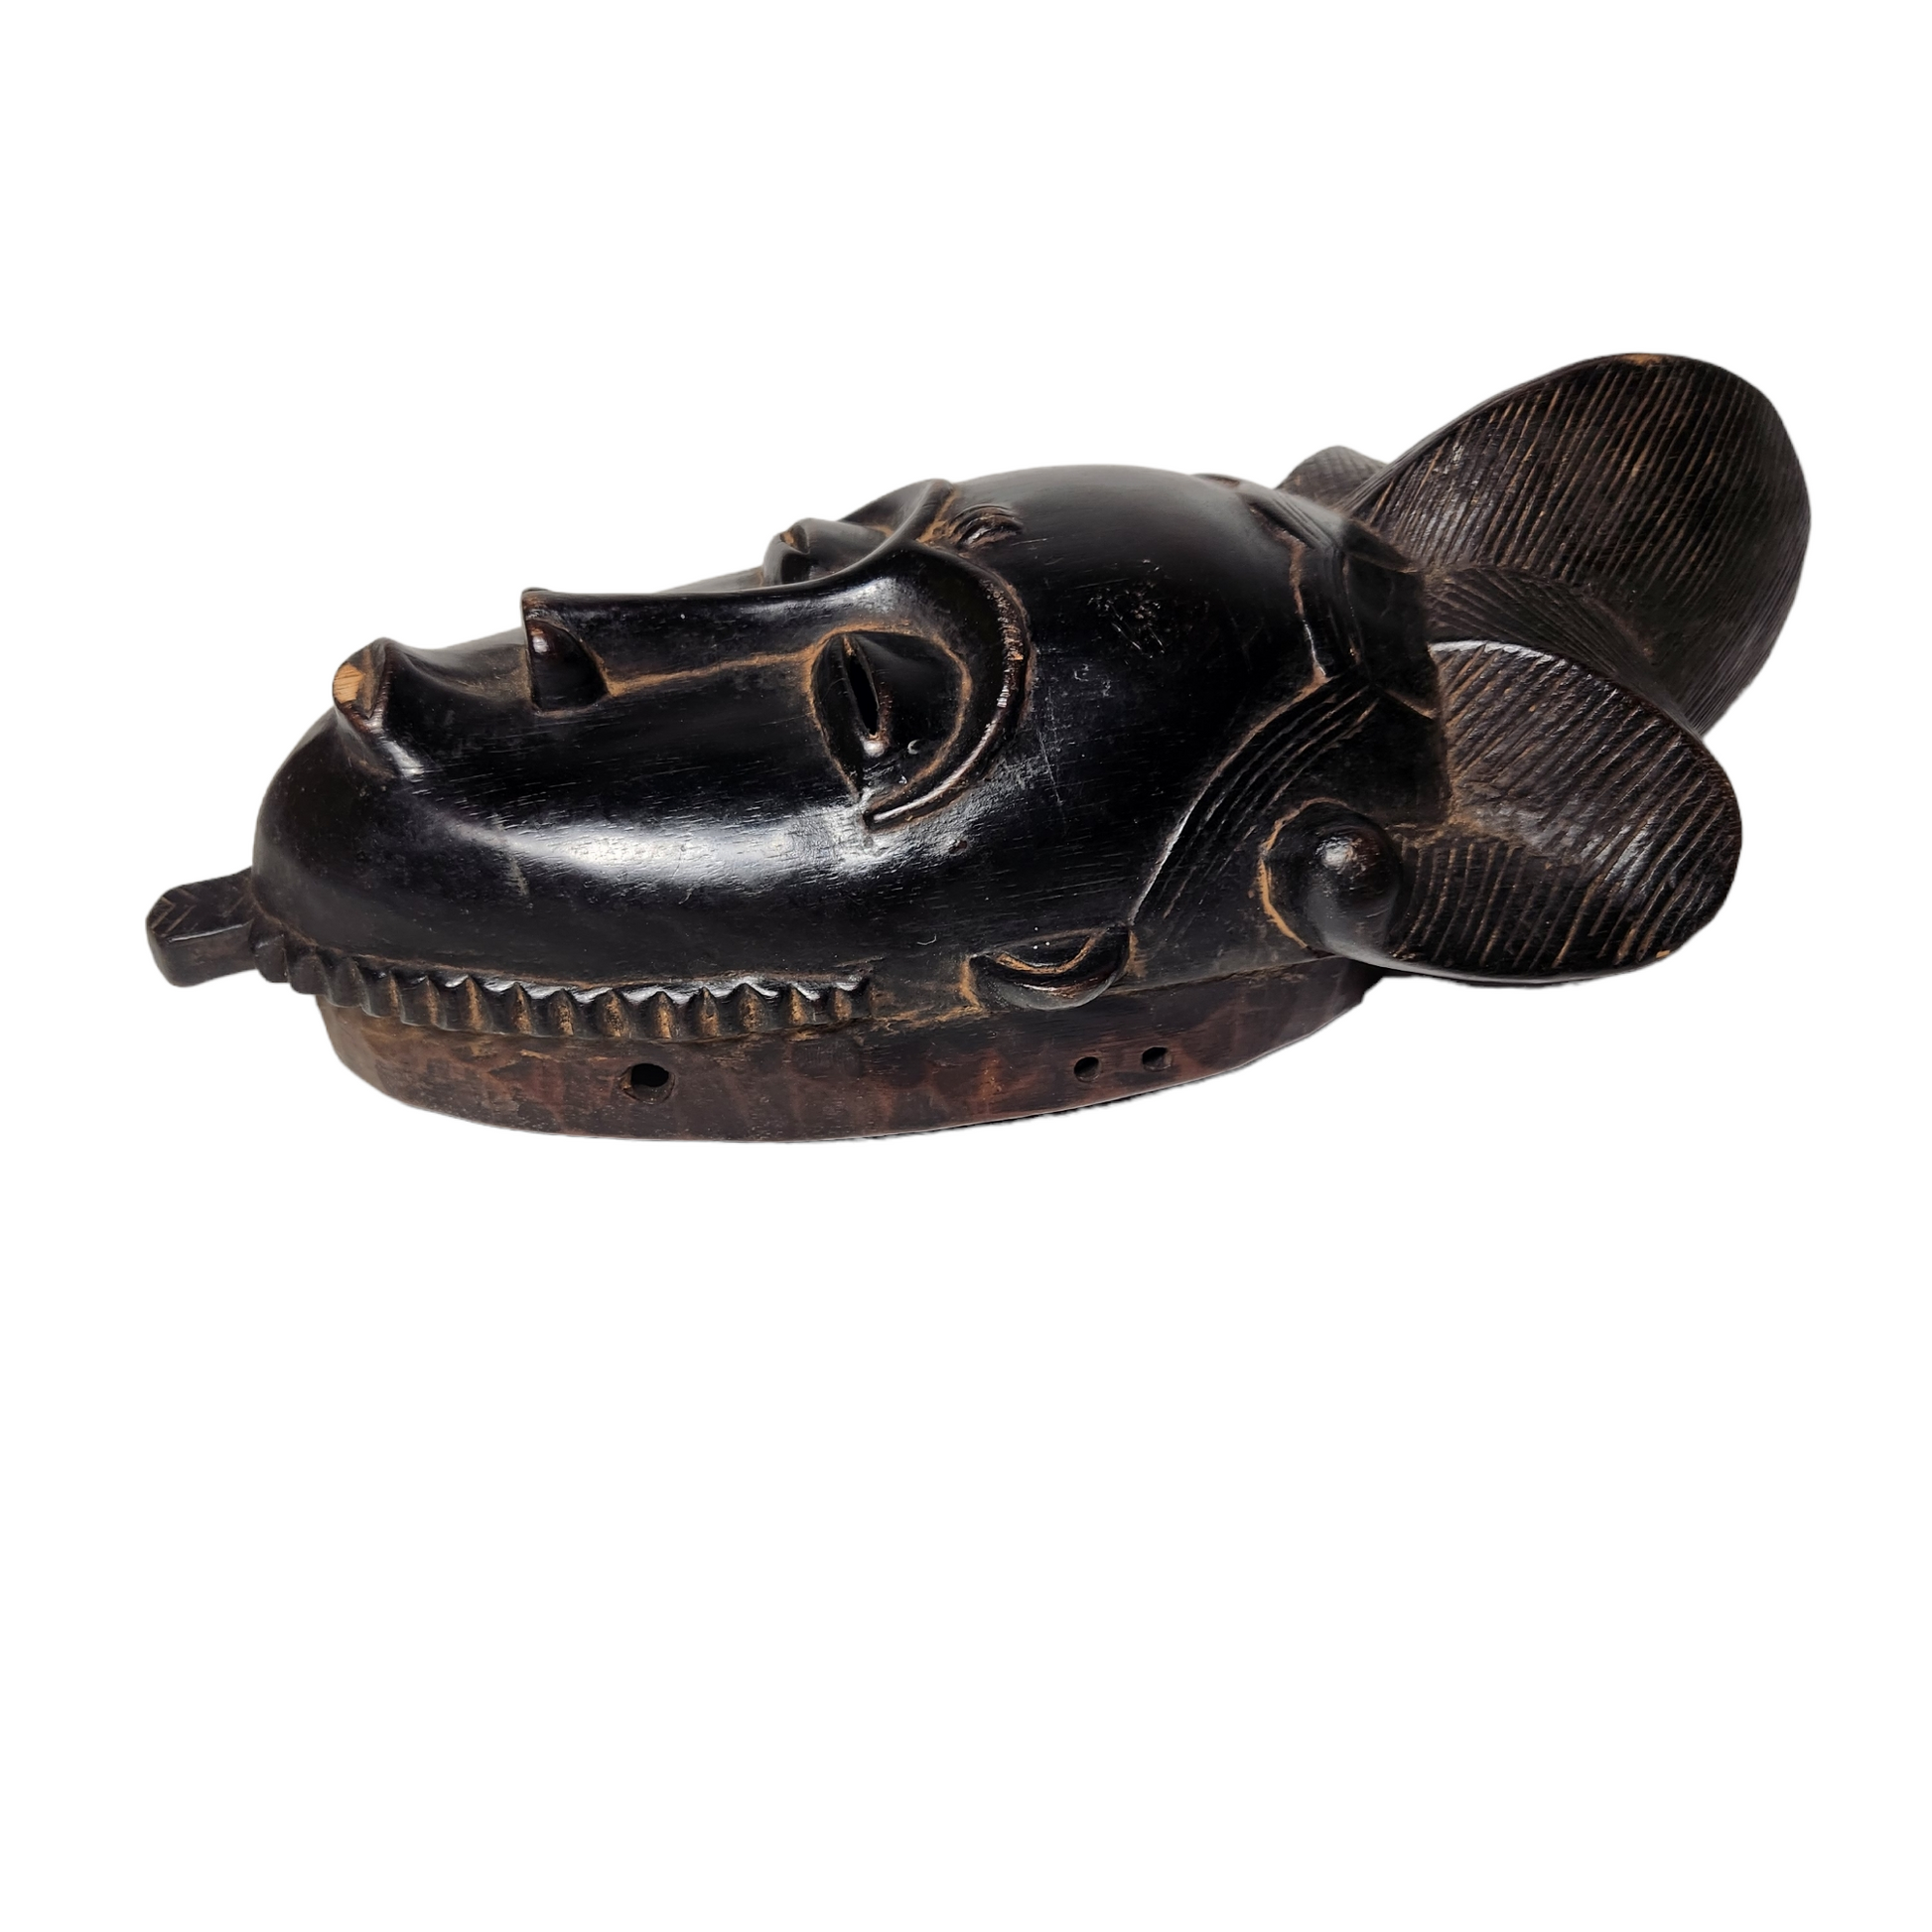 Baule Mask from Ivory Coast ( 20th Century) - MD African Art